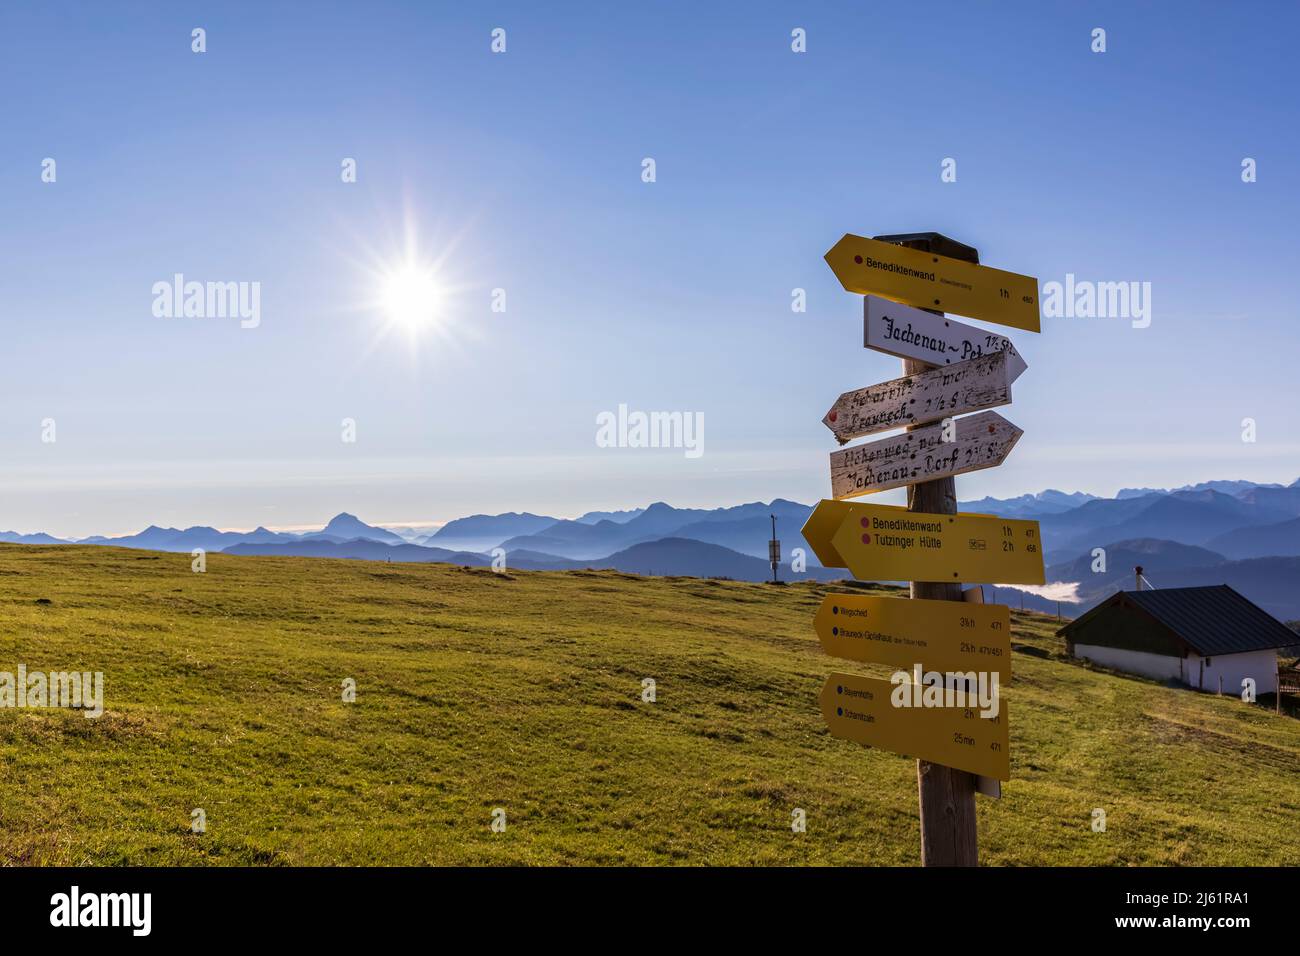 Directional sign in Bavarian Prealps at foggy sunrise Stock Photo